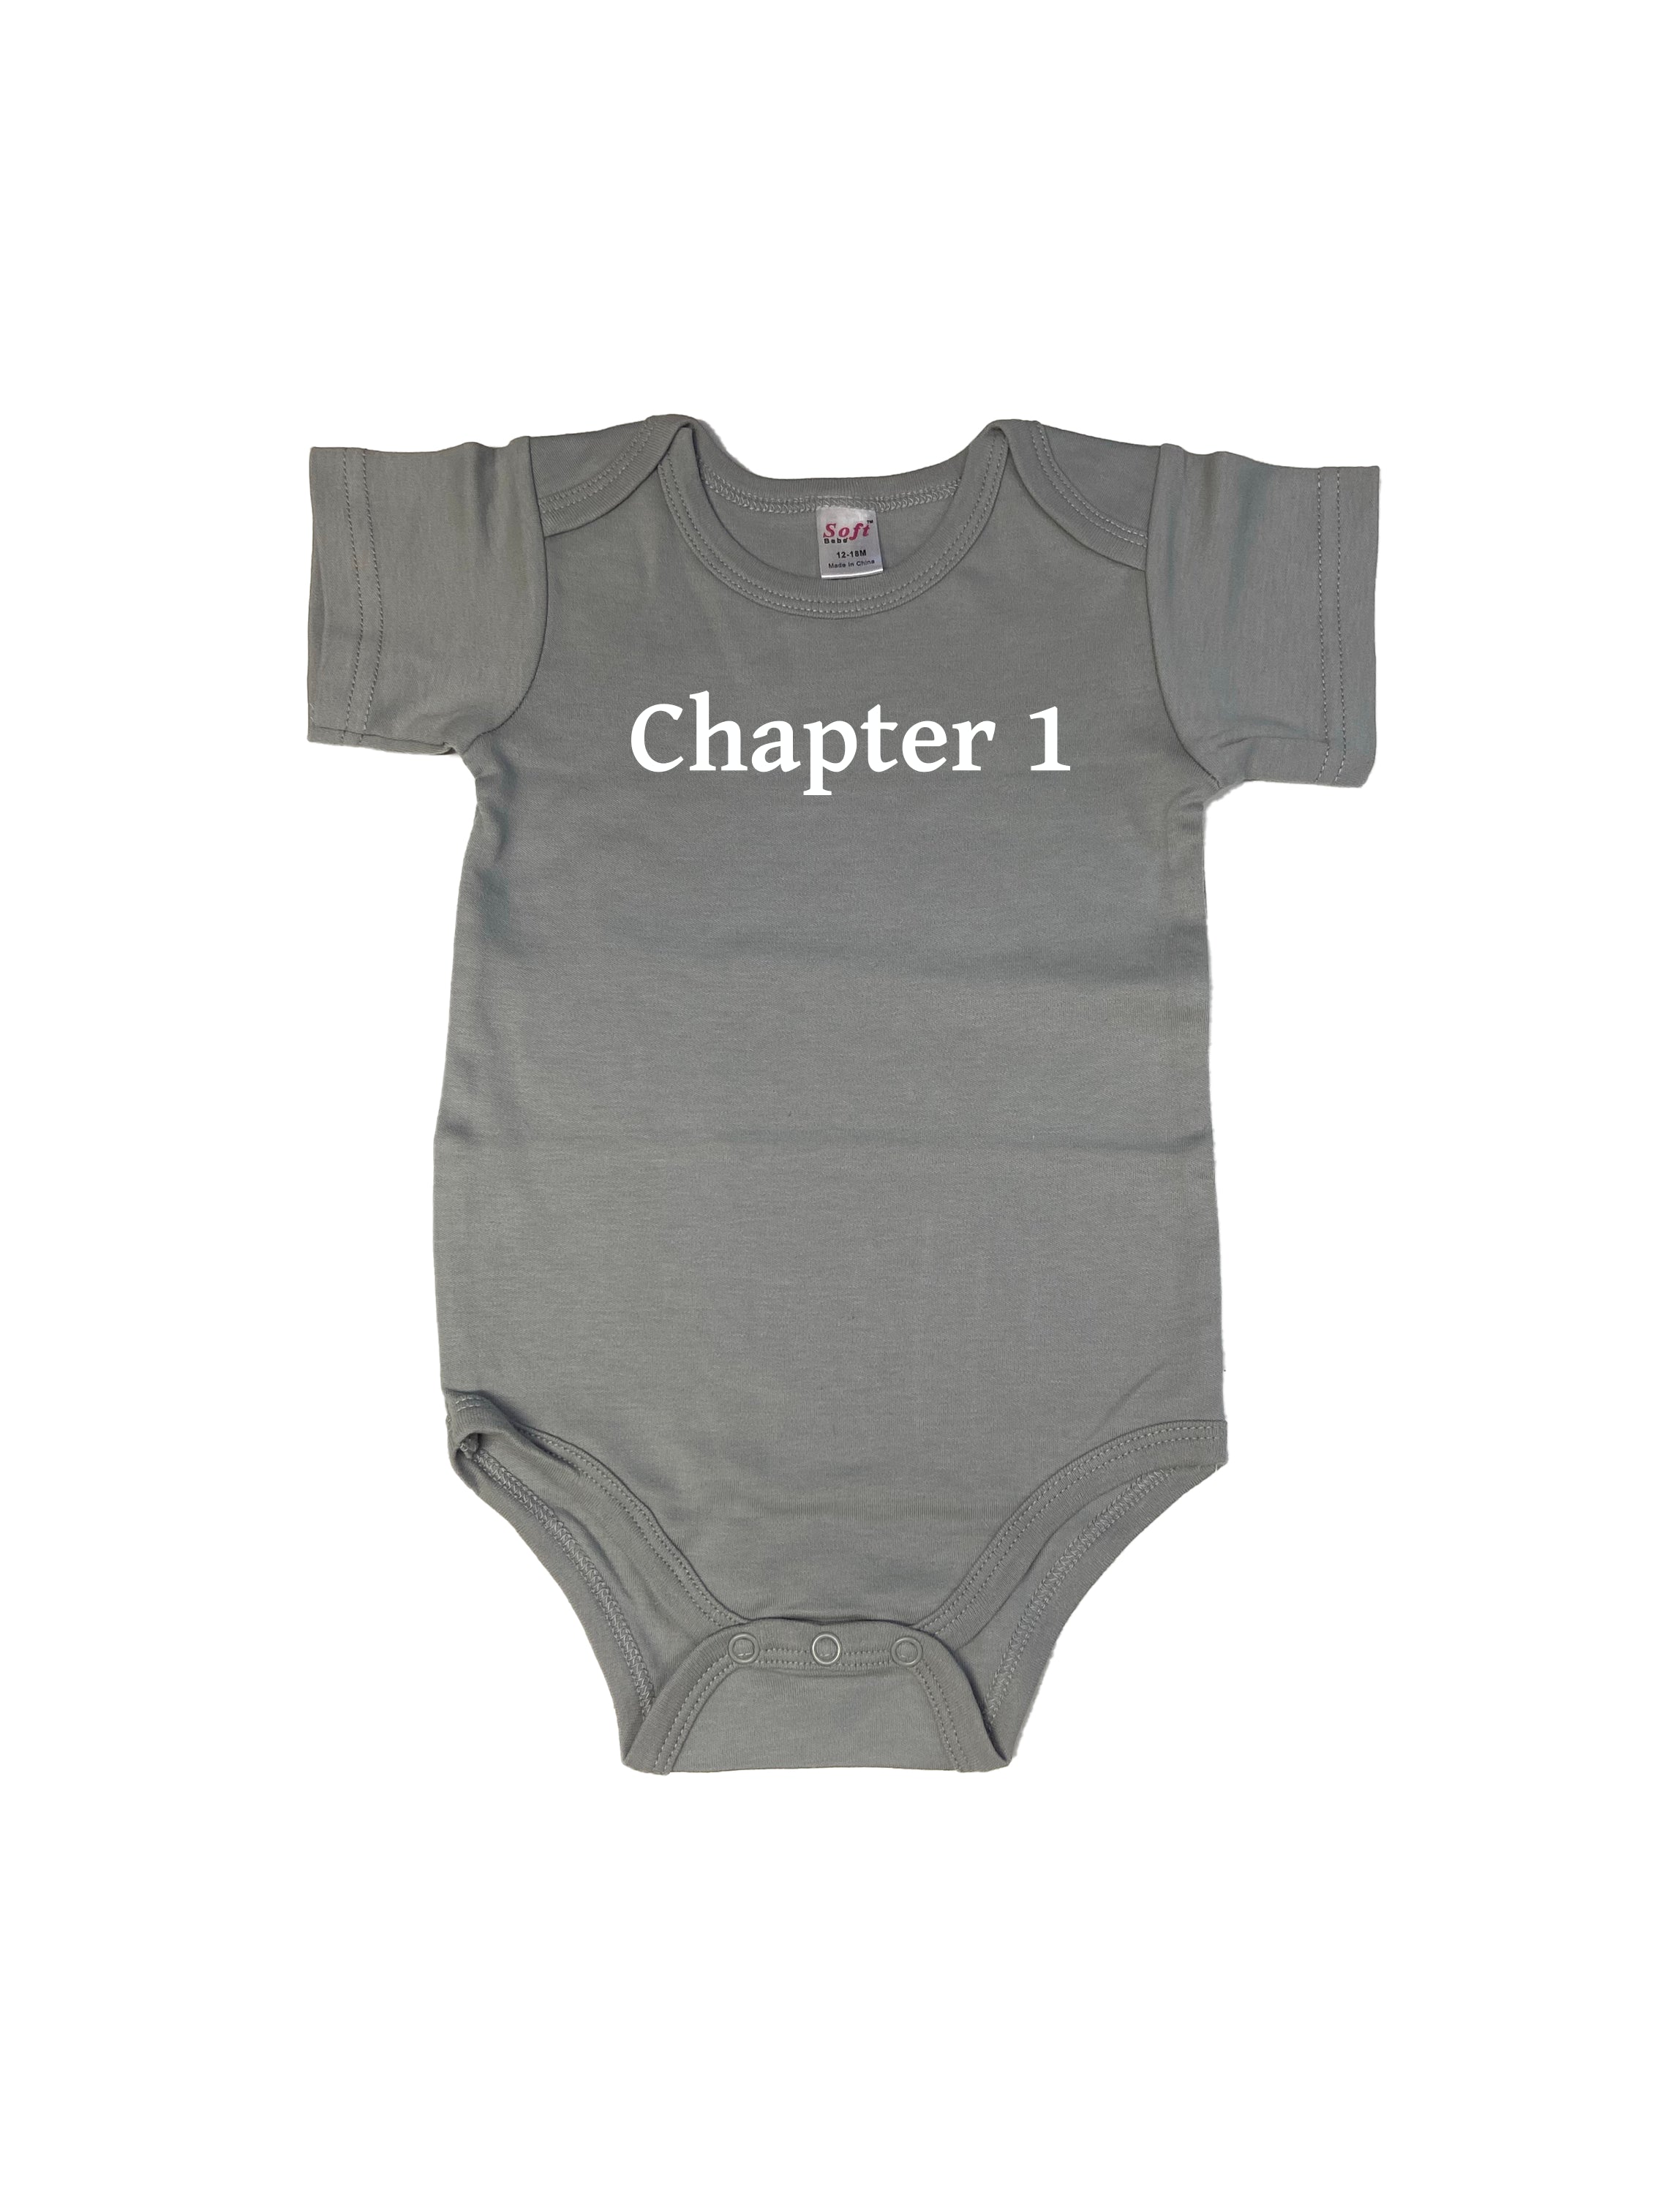 Bookish Endeavors Baby & Children's T-Shirts